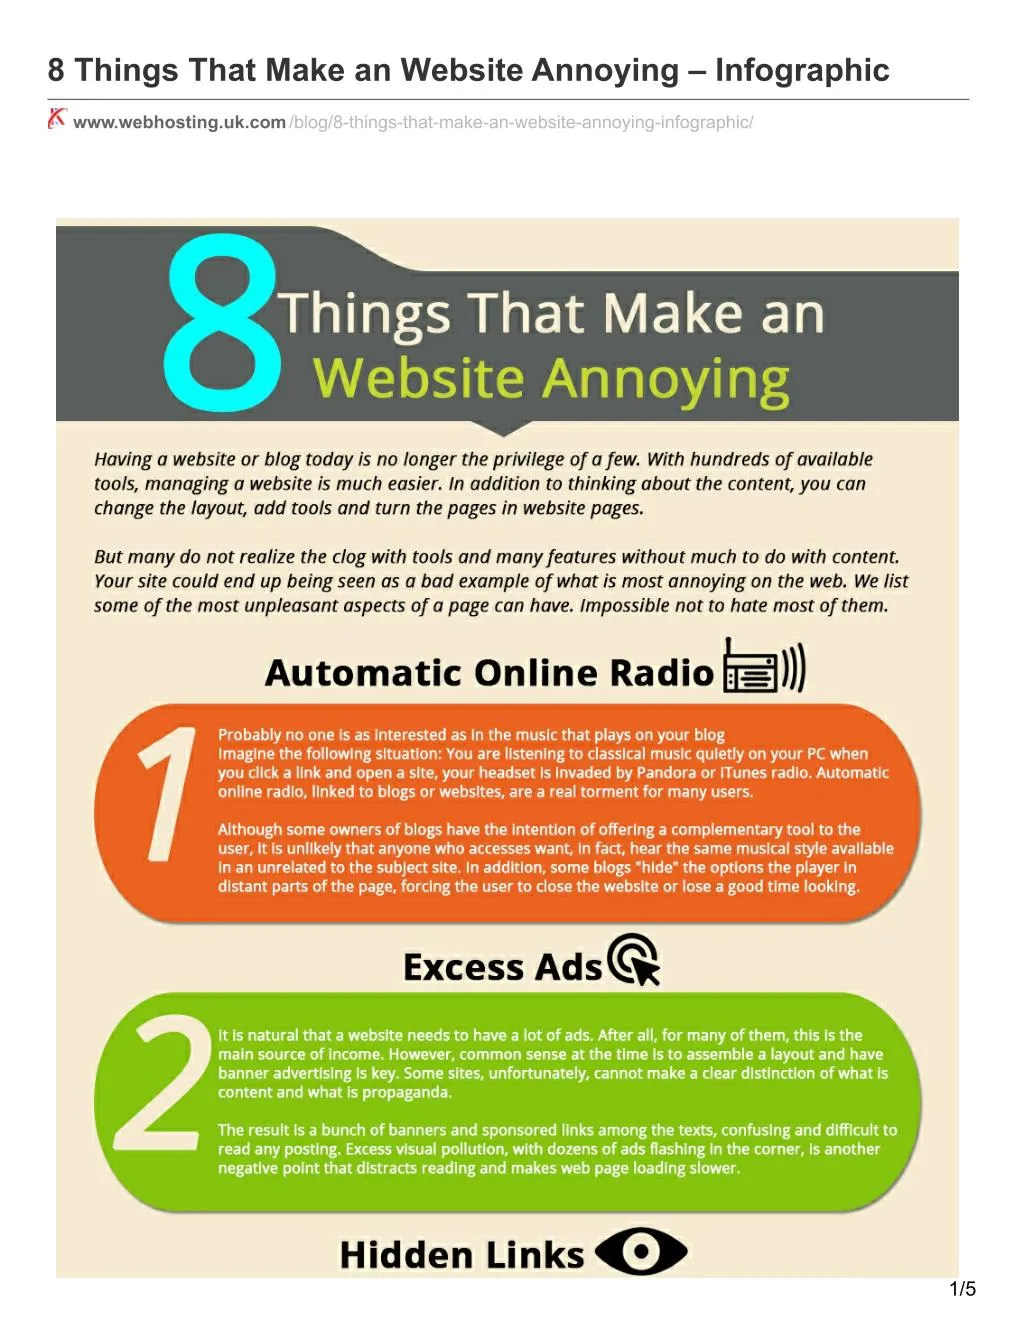 8 things that make an website annoying infographic